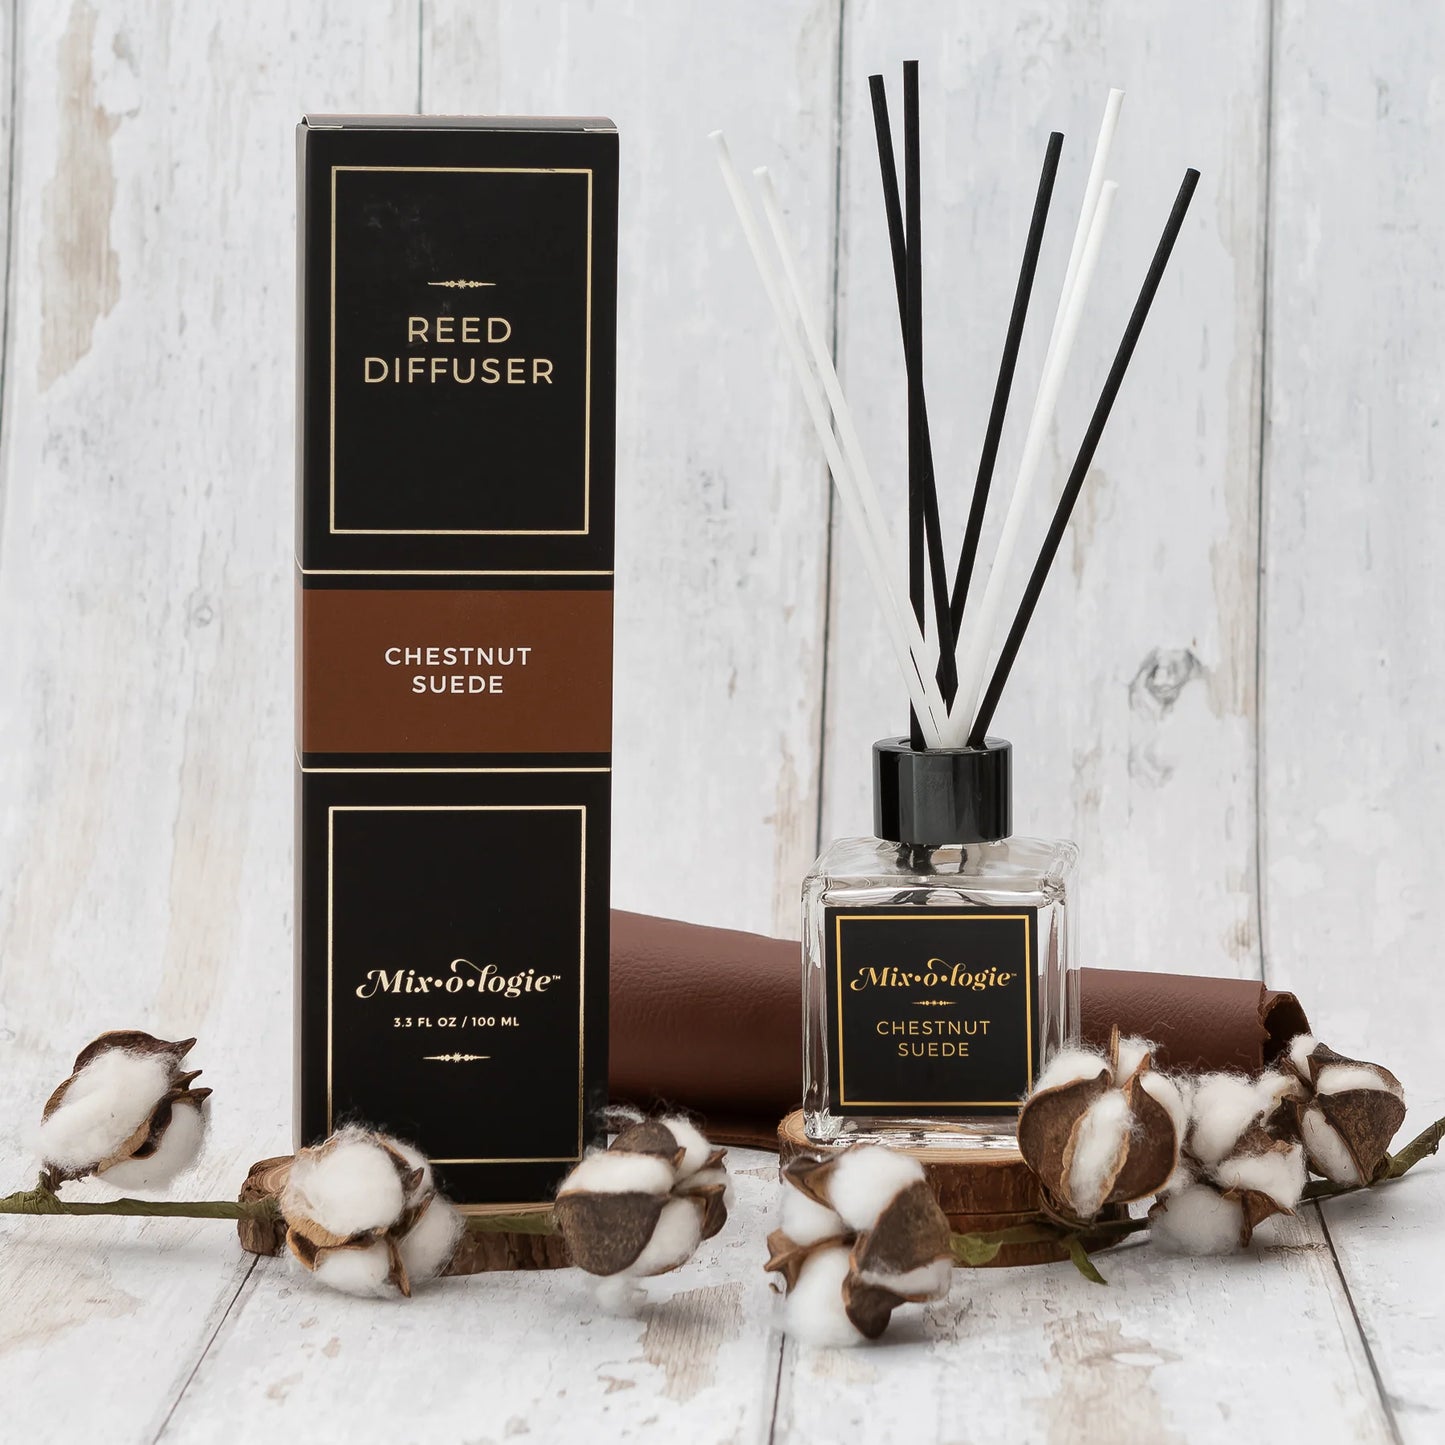 Chestnut Suede Reed Diffuser